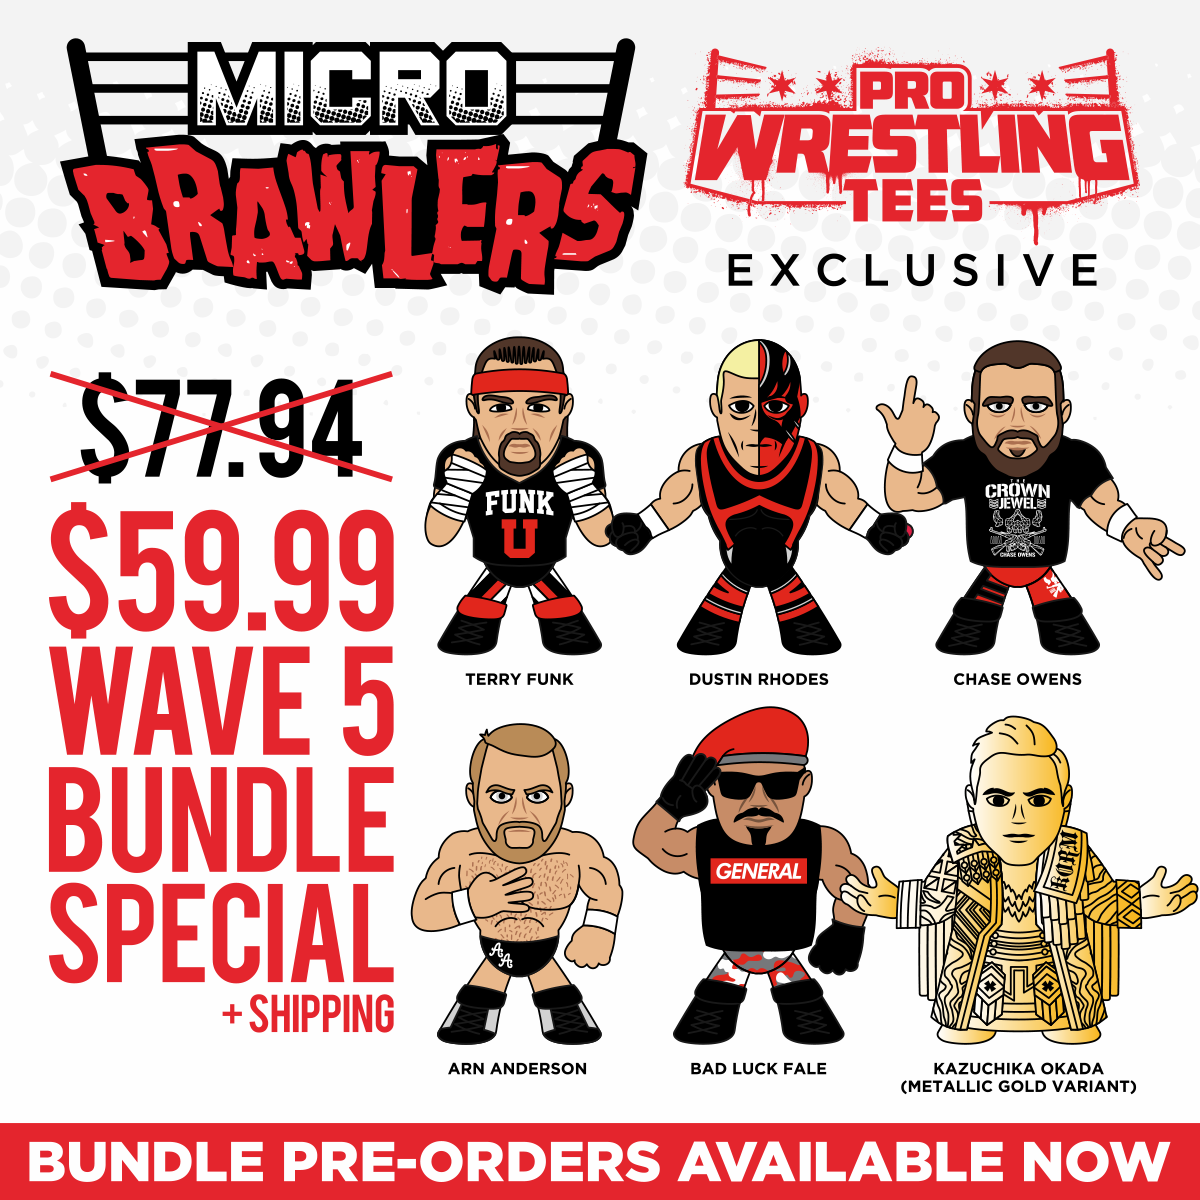 OKADA, TERRY FUNK & MORE MICRO BRAWLERS AVAILABLE FROM PROWRESTLINGTEES.COM